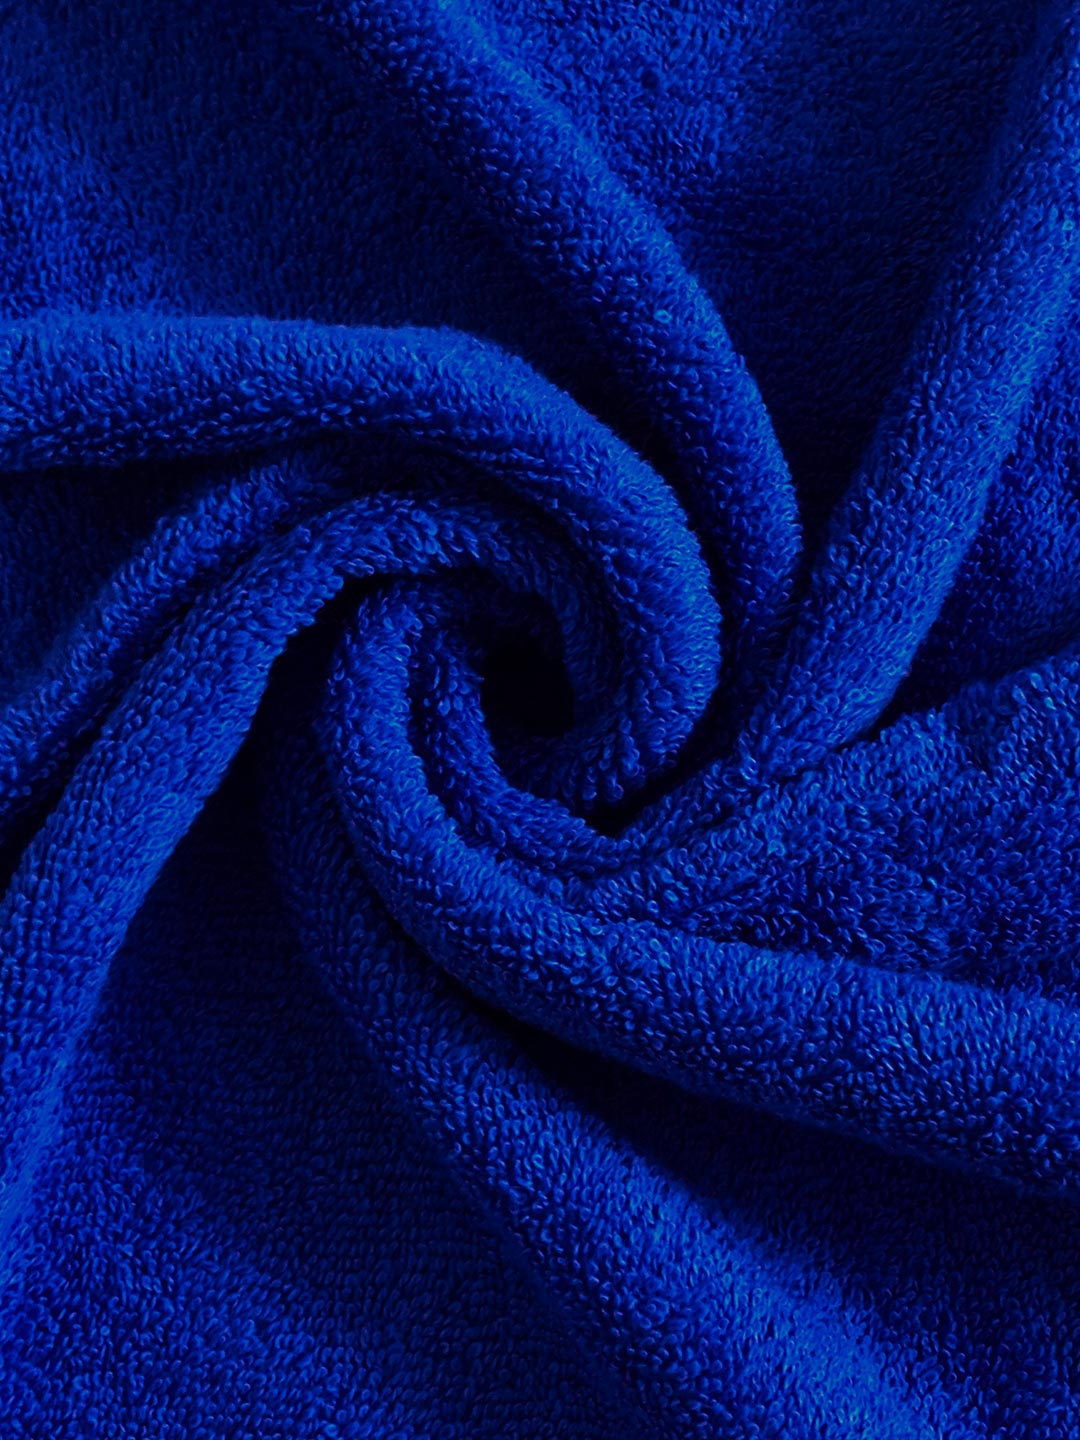 Spaces Swift Dry 450 GSM Solid Large Bath Towel (Blue)